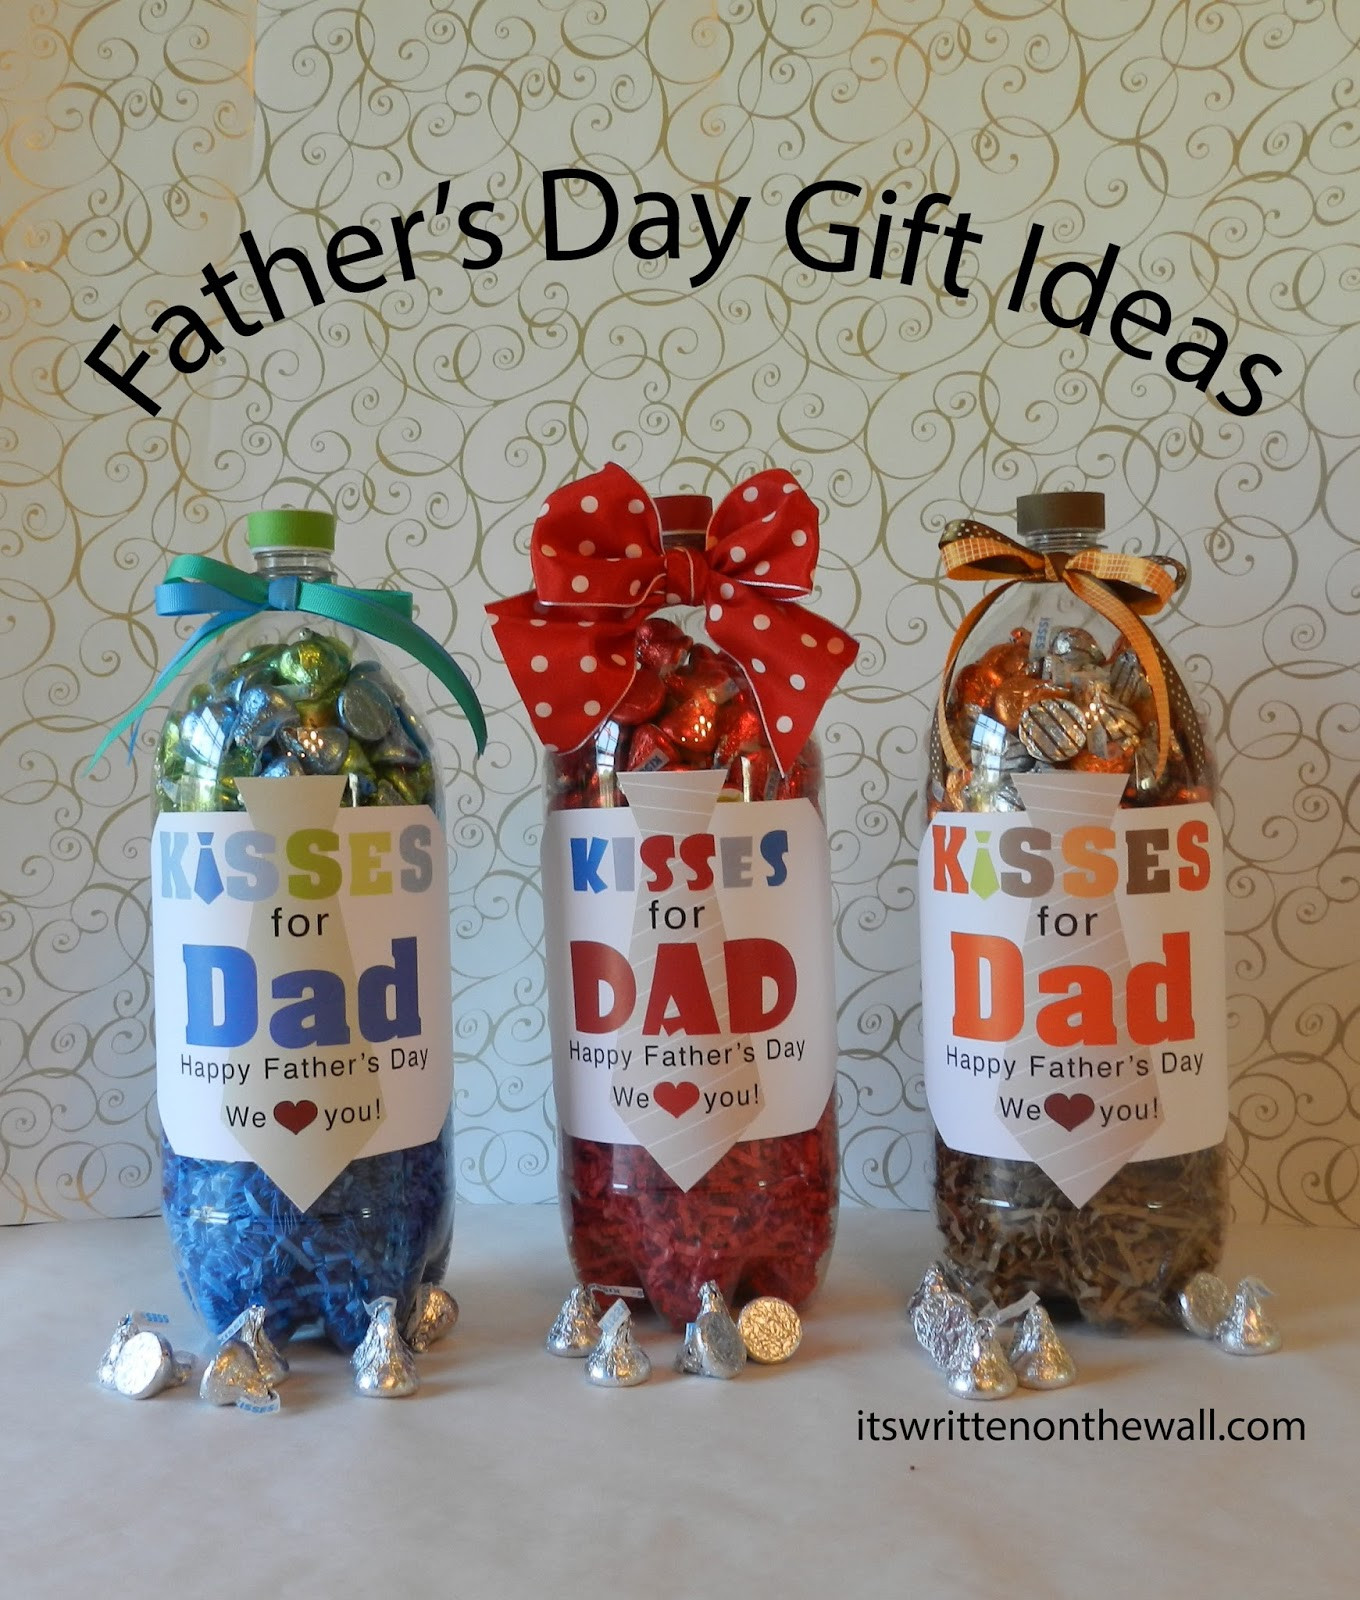 Gift Ideas For Dad From Kids
 It s Written on the Wall Fathers Day Gift Ideas For the